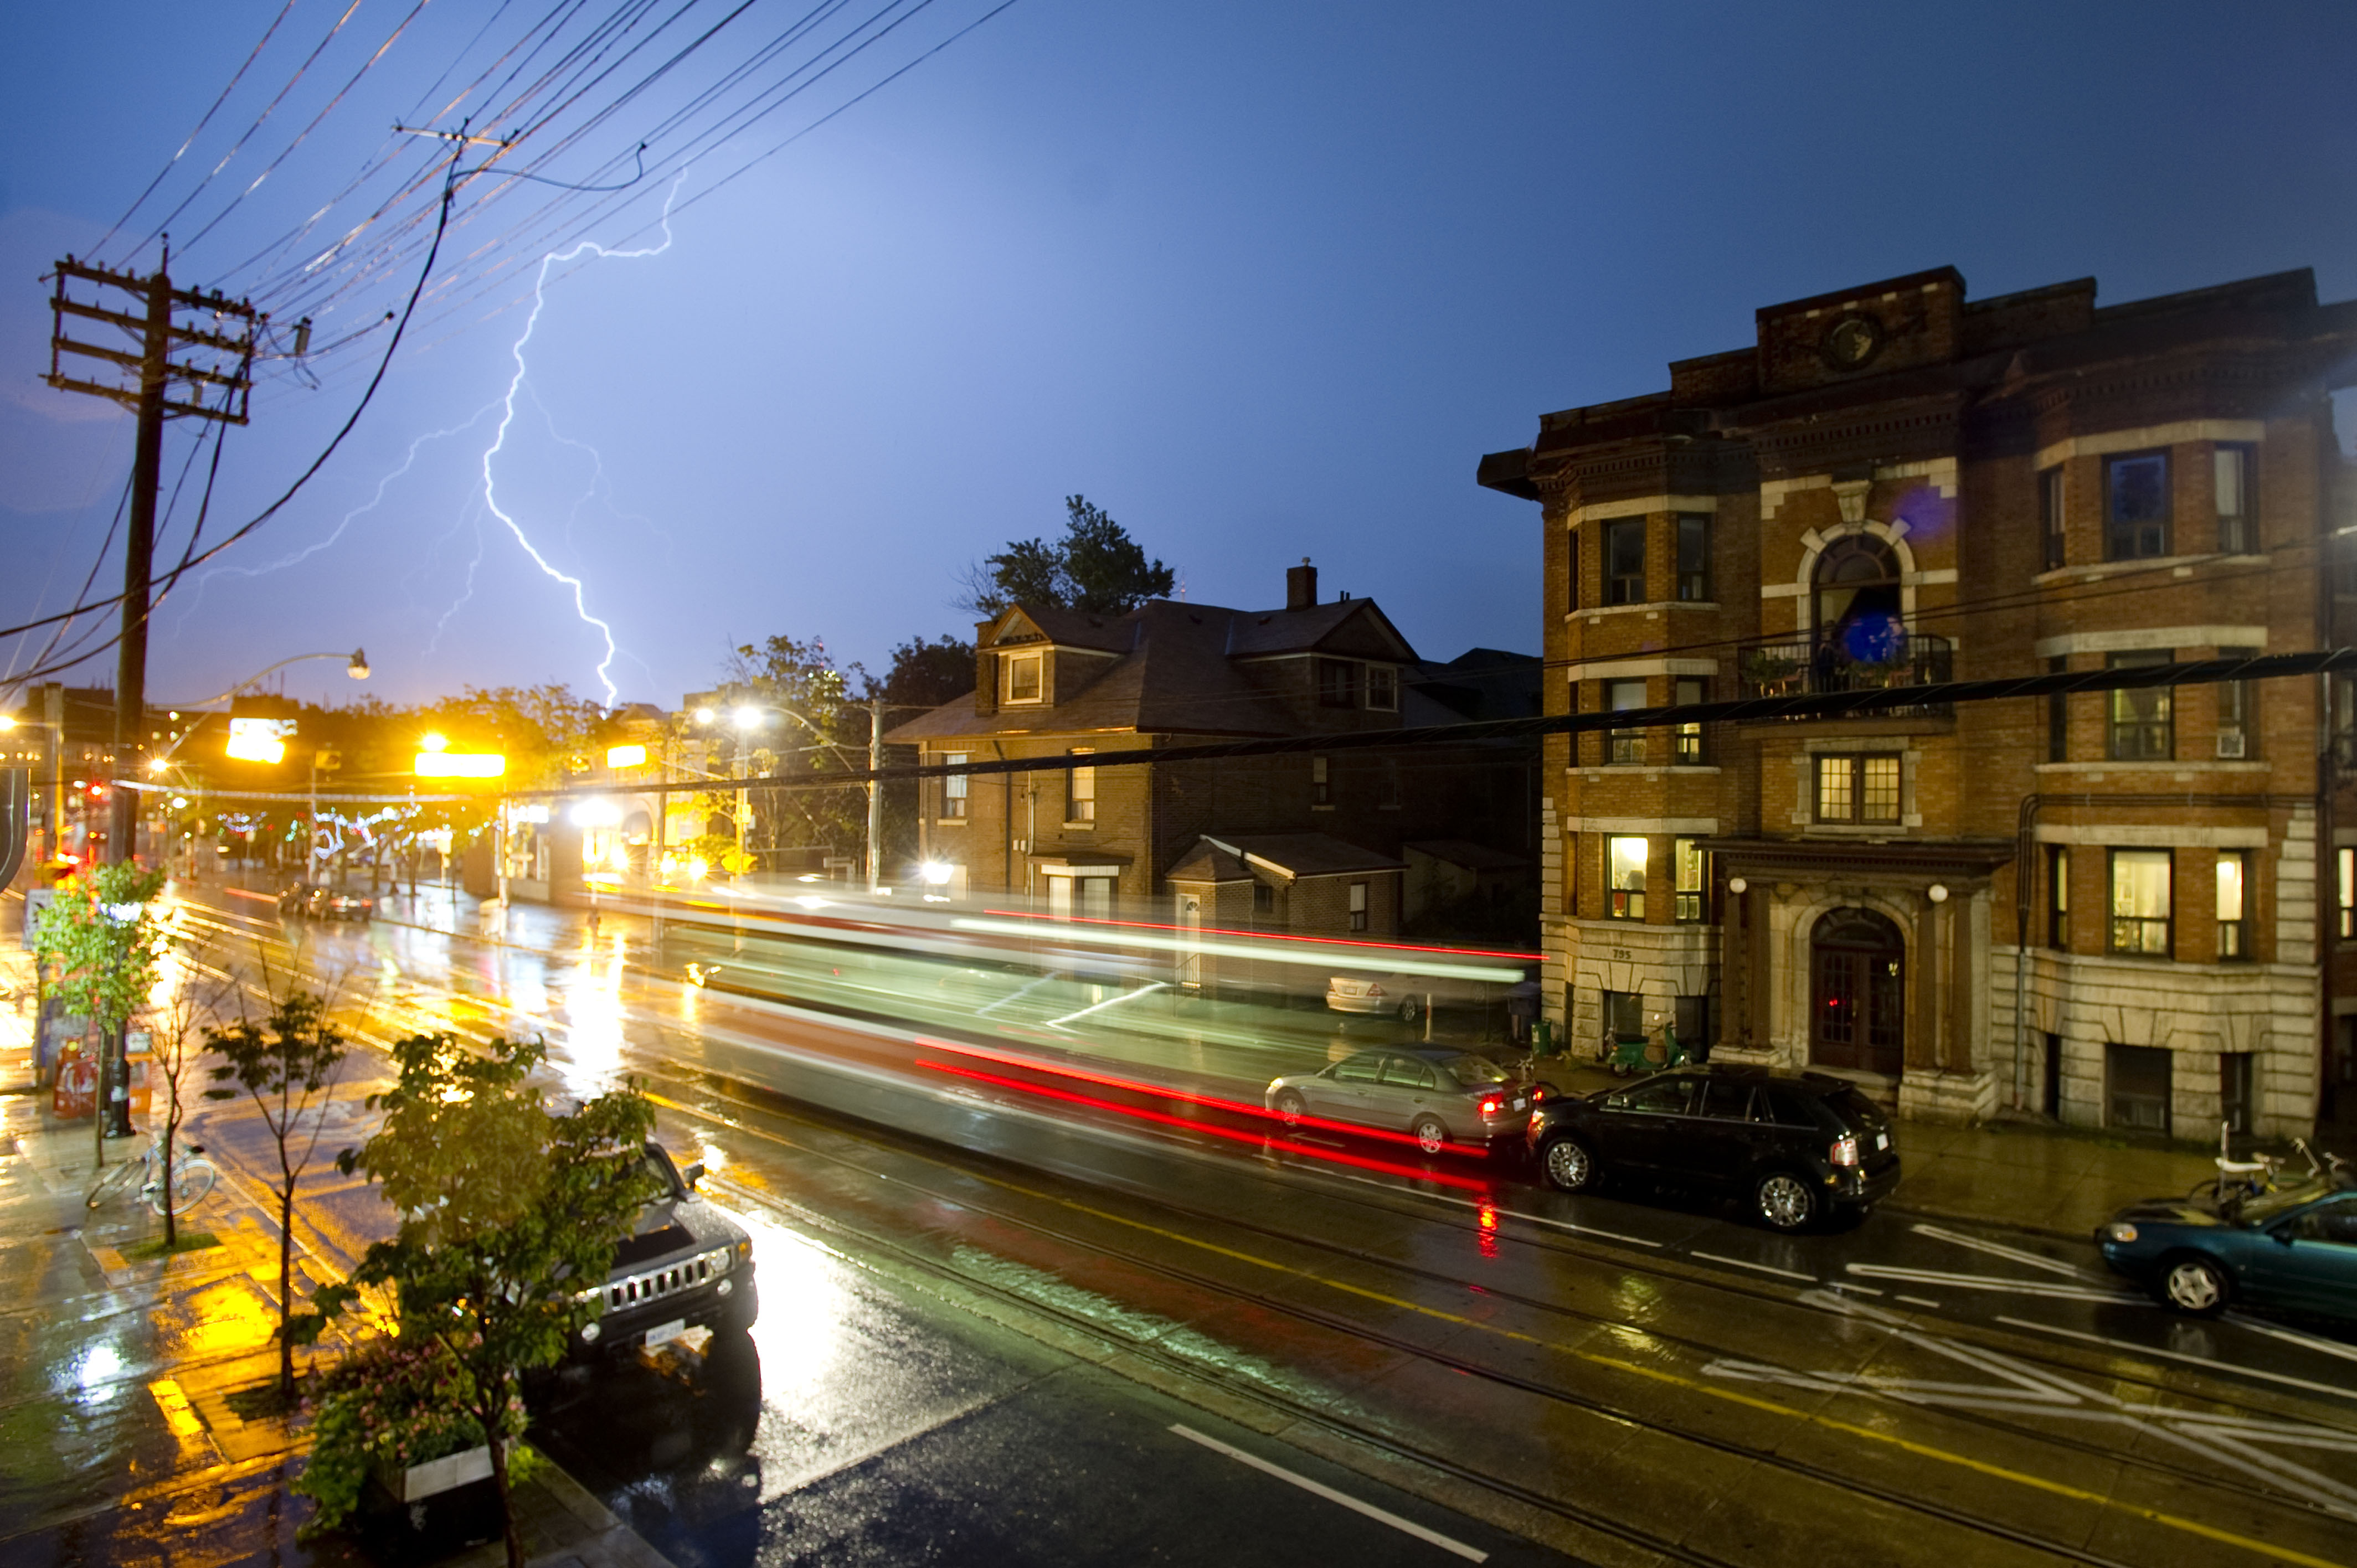 Southern Ontario may experience severe thunderstorms Monday night, or worse, according to Environment Canada.